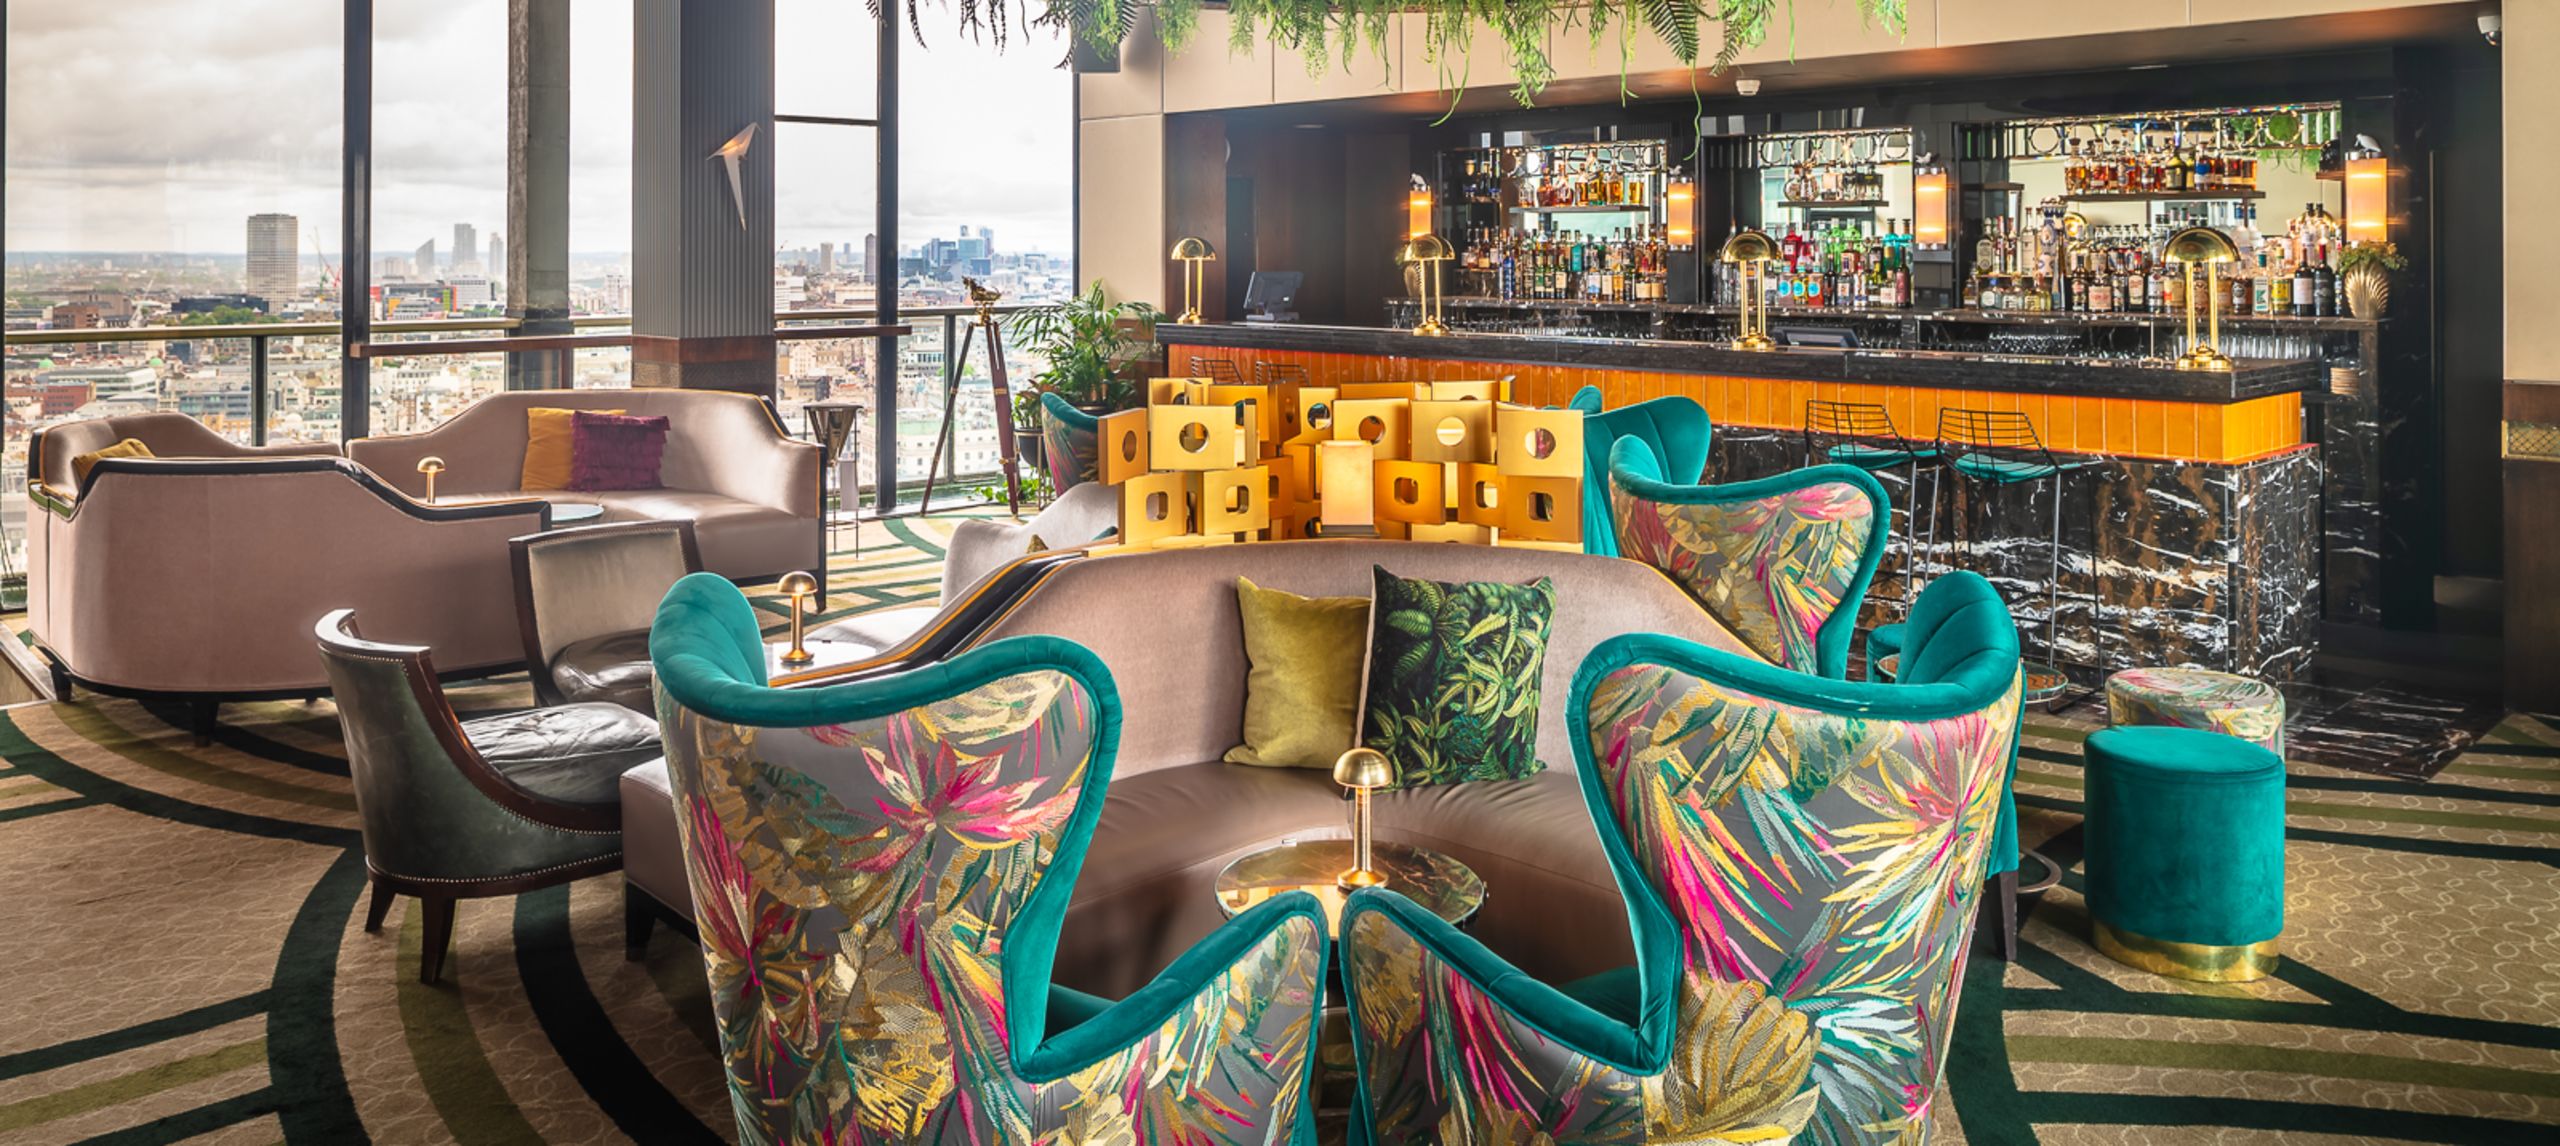 View of Colourful chairs in bar area